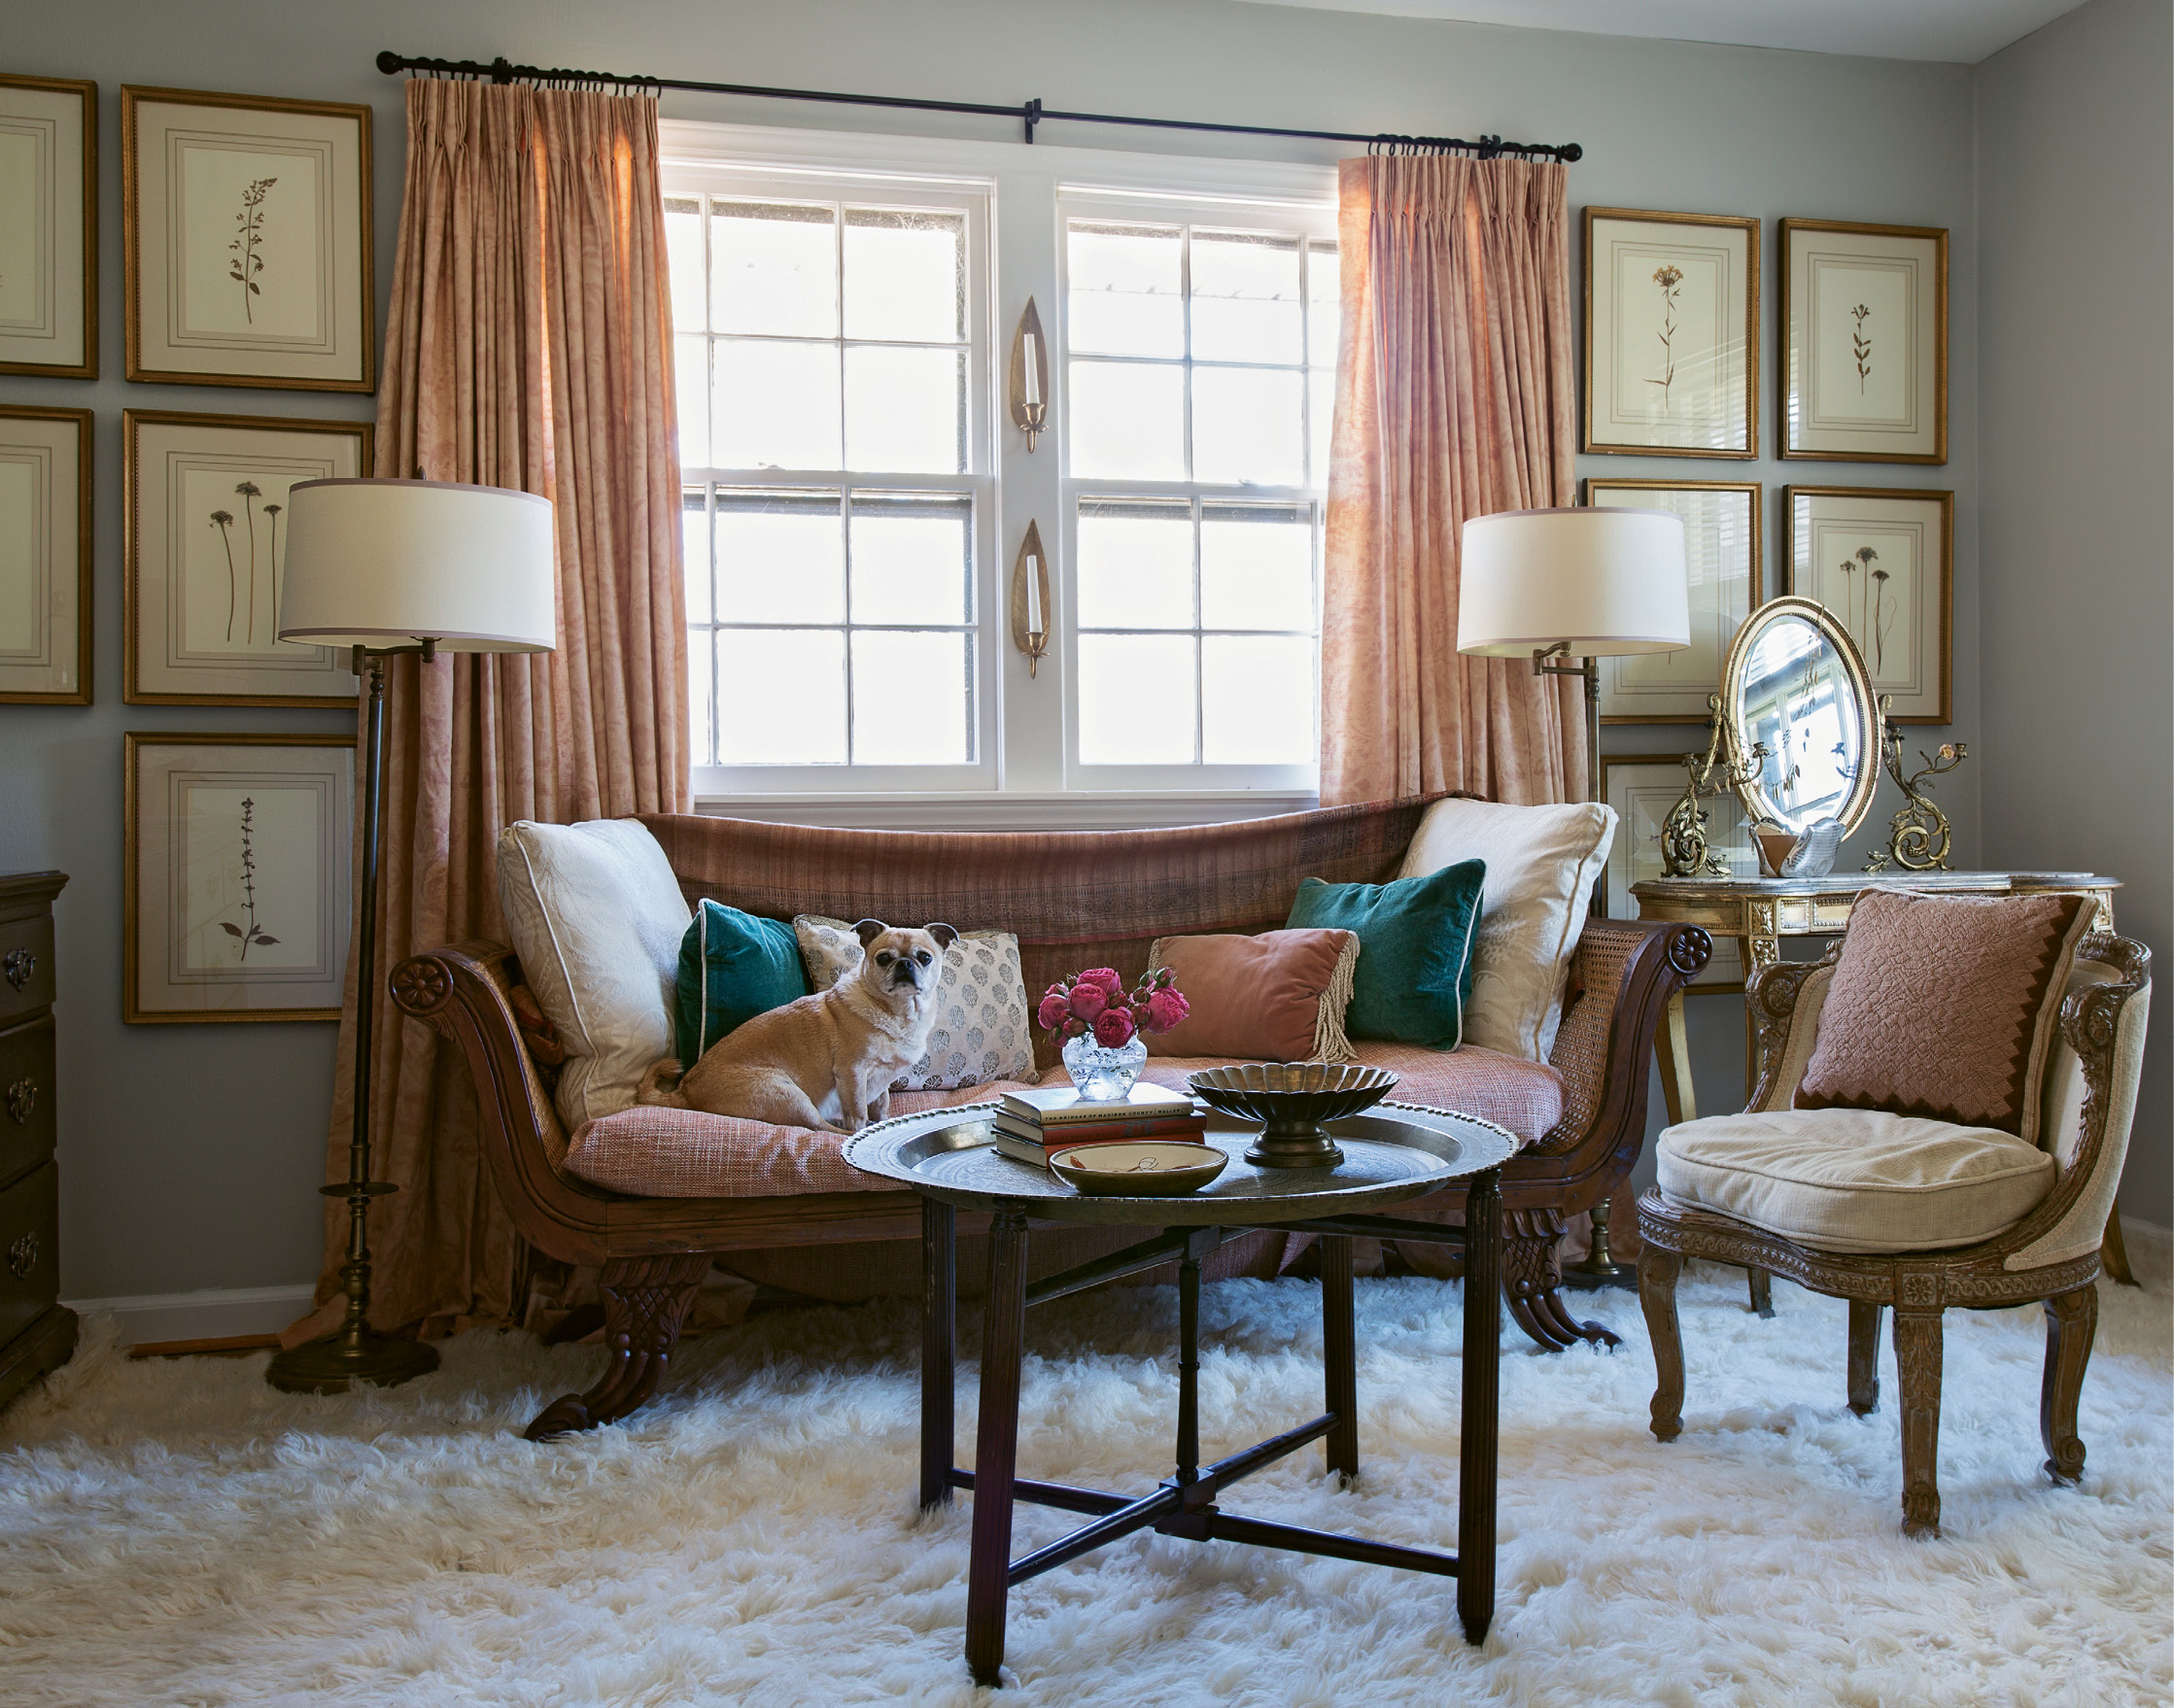 Lady’s Lounge: A vintage Italian settee and textiles in dusty pinks and creams—with a few pops of peacock blue—set a ladylike tone in Tinkler’s dressing room. On the wall, a large grouping of pressed botanicals in gilt frames adds a sense of dimension.